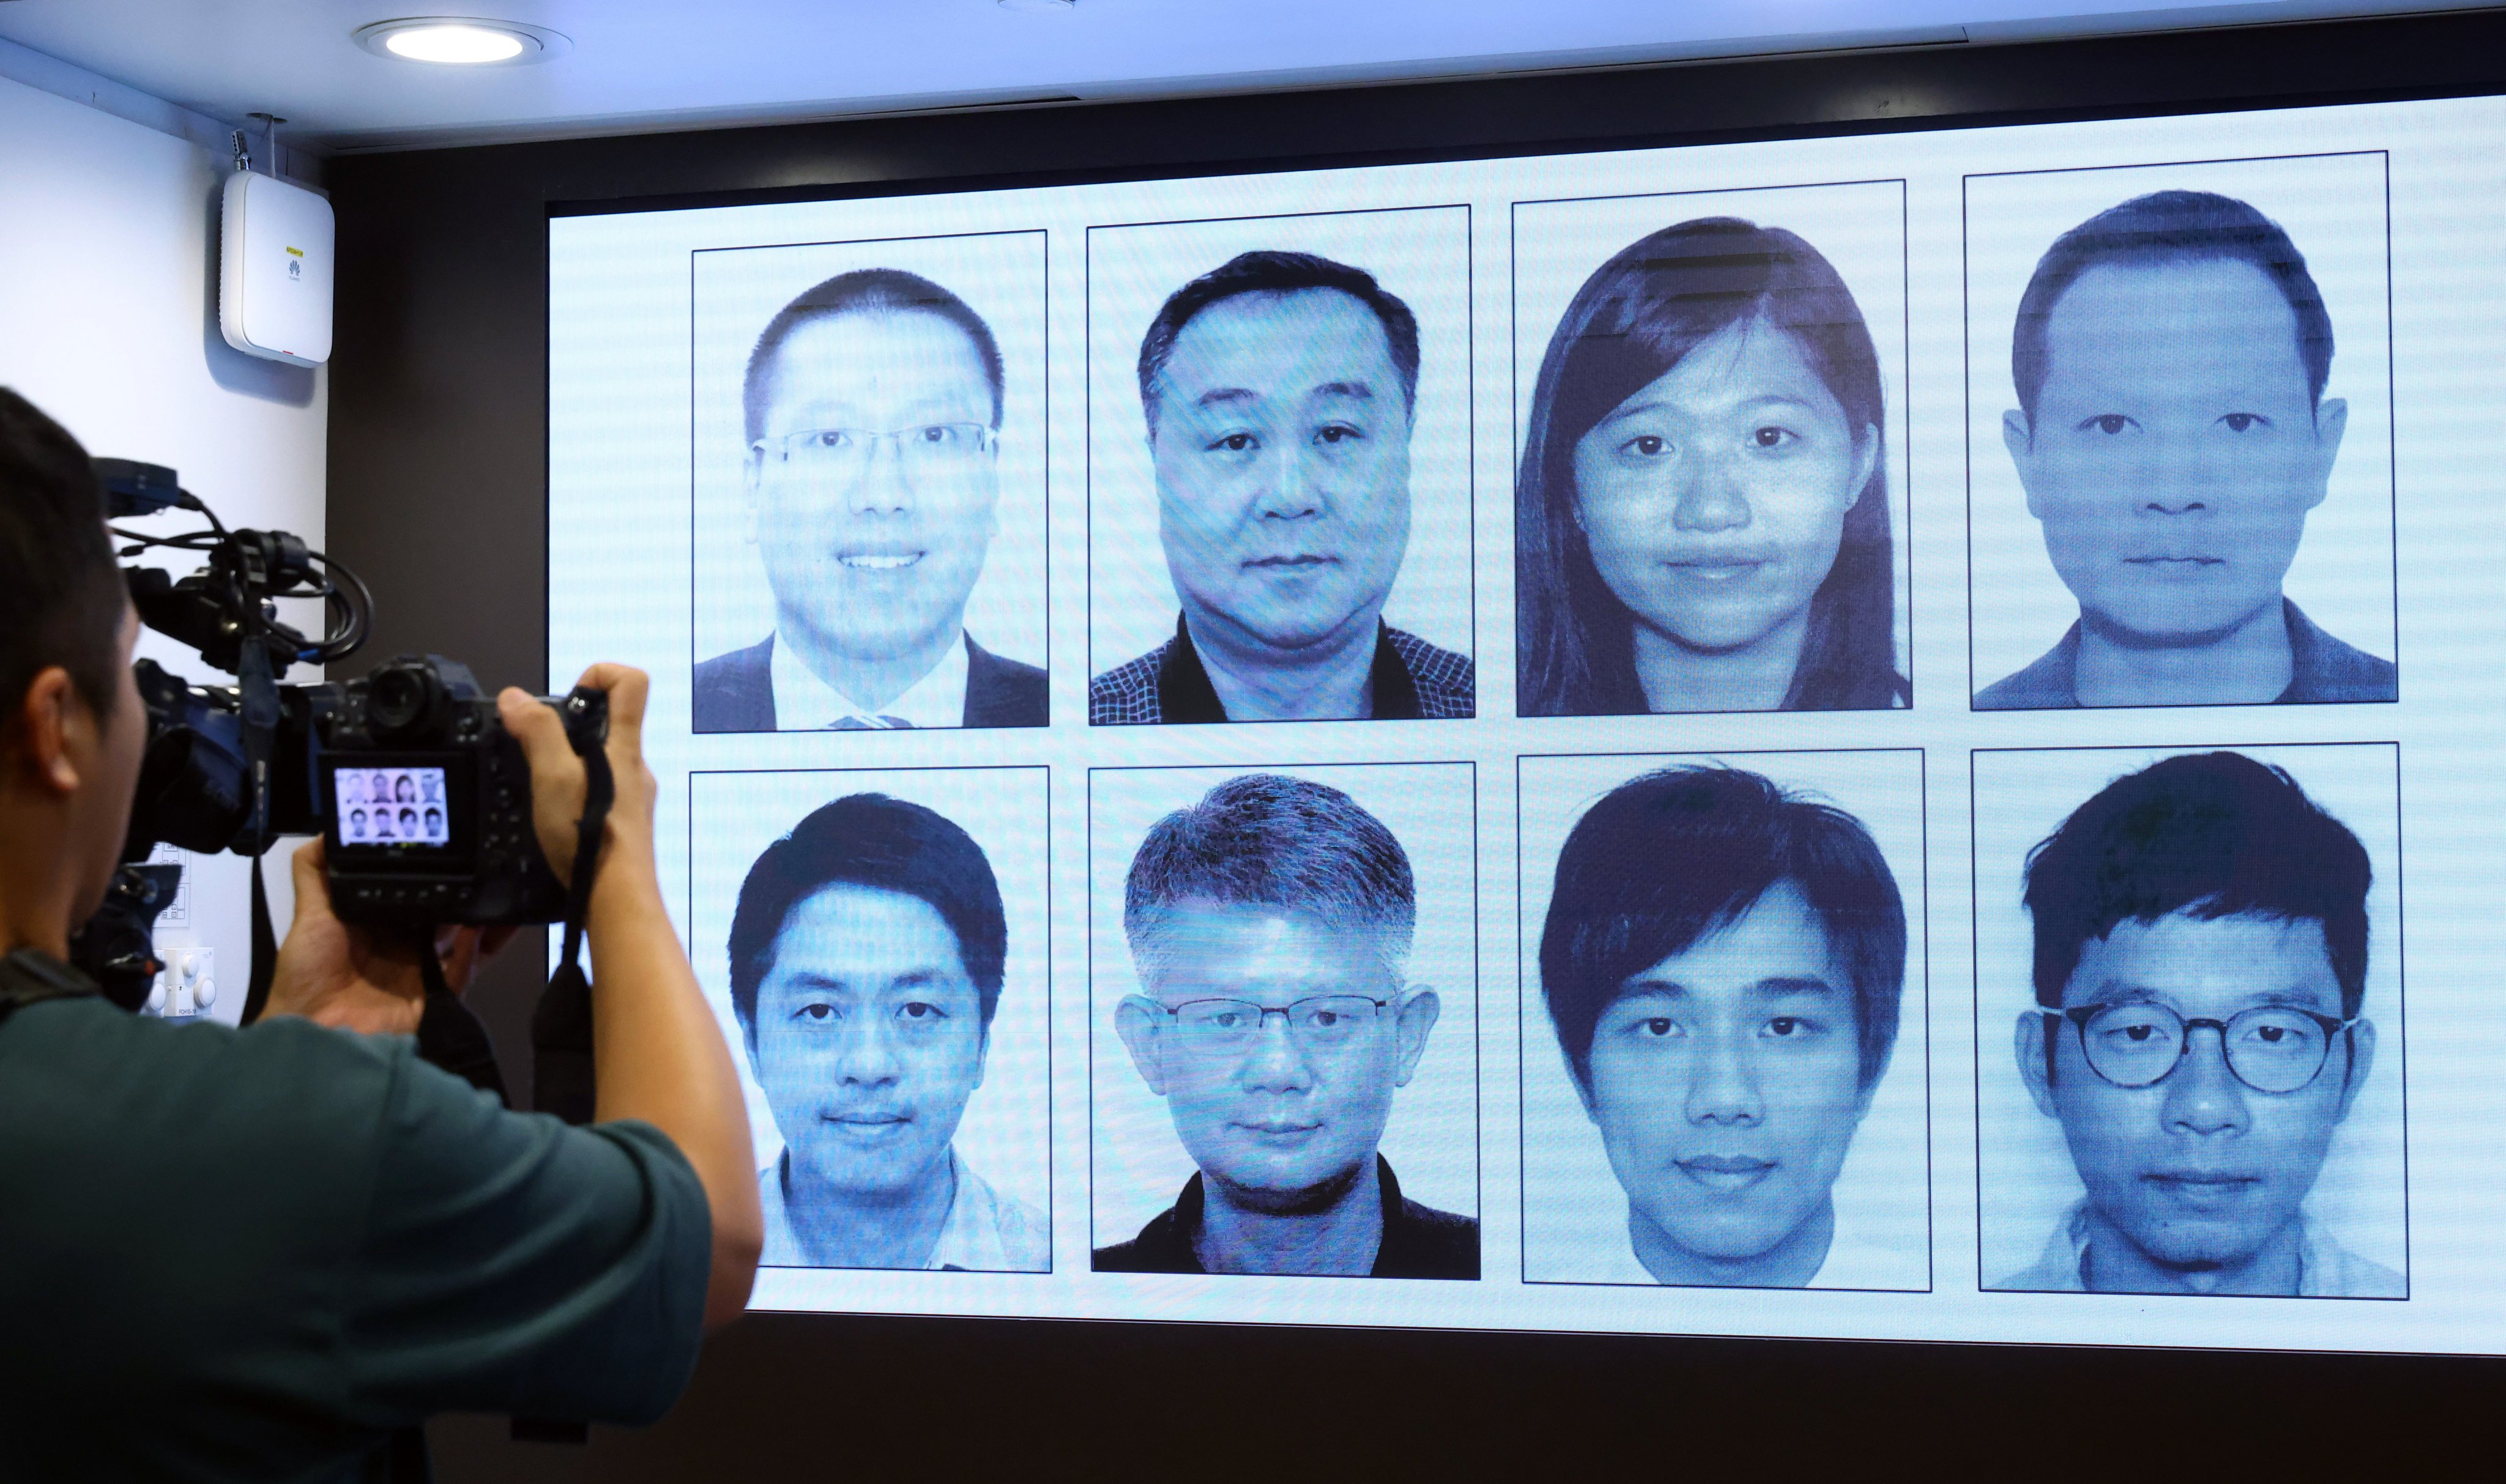 The eight suspects are (clockwise from top left) Kevin Yam, Elmer Yuan, Anna Kwok, Dennis Kwok, Nathan Law, Finn Lau, Mung Siu-tat and Ted Hui. Photo: Dickson Lee